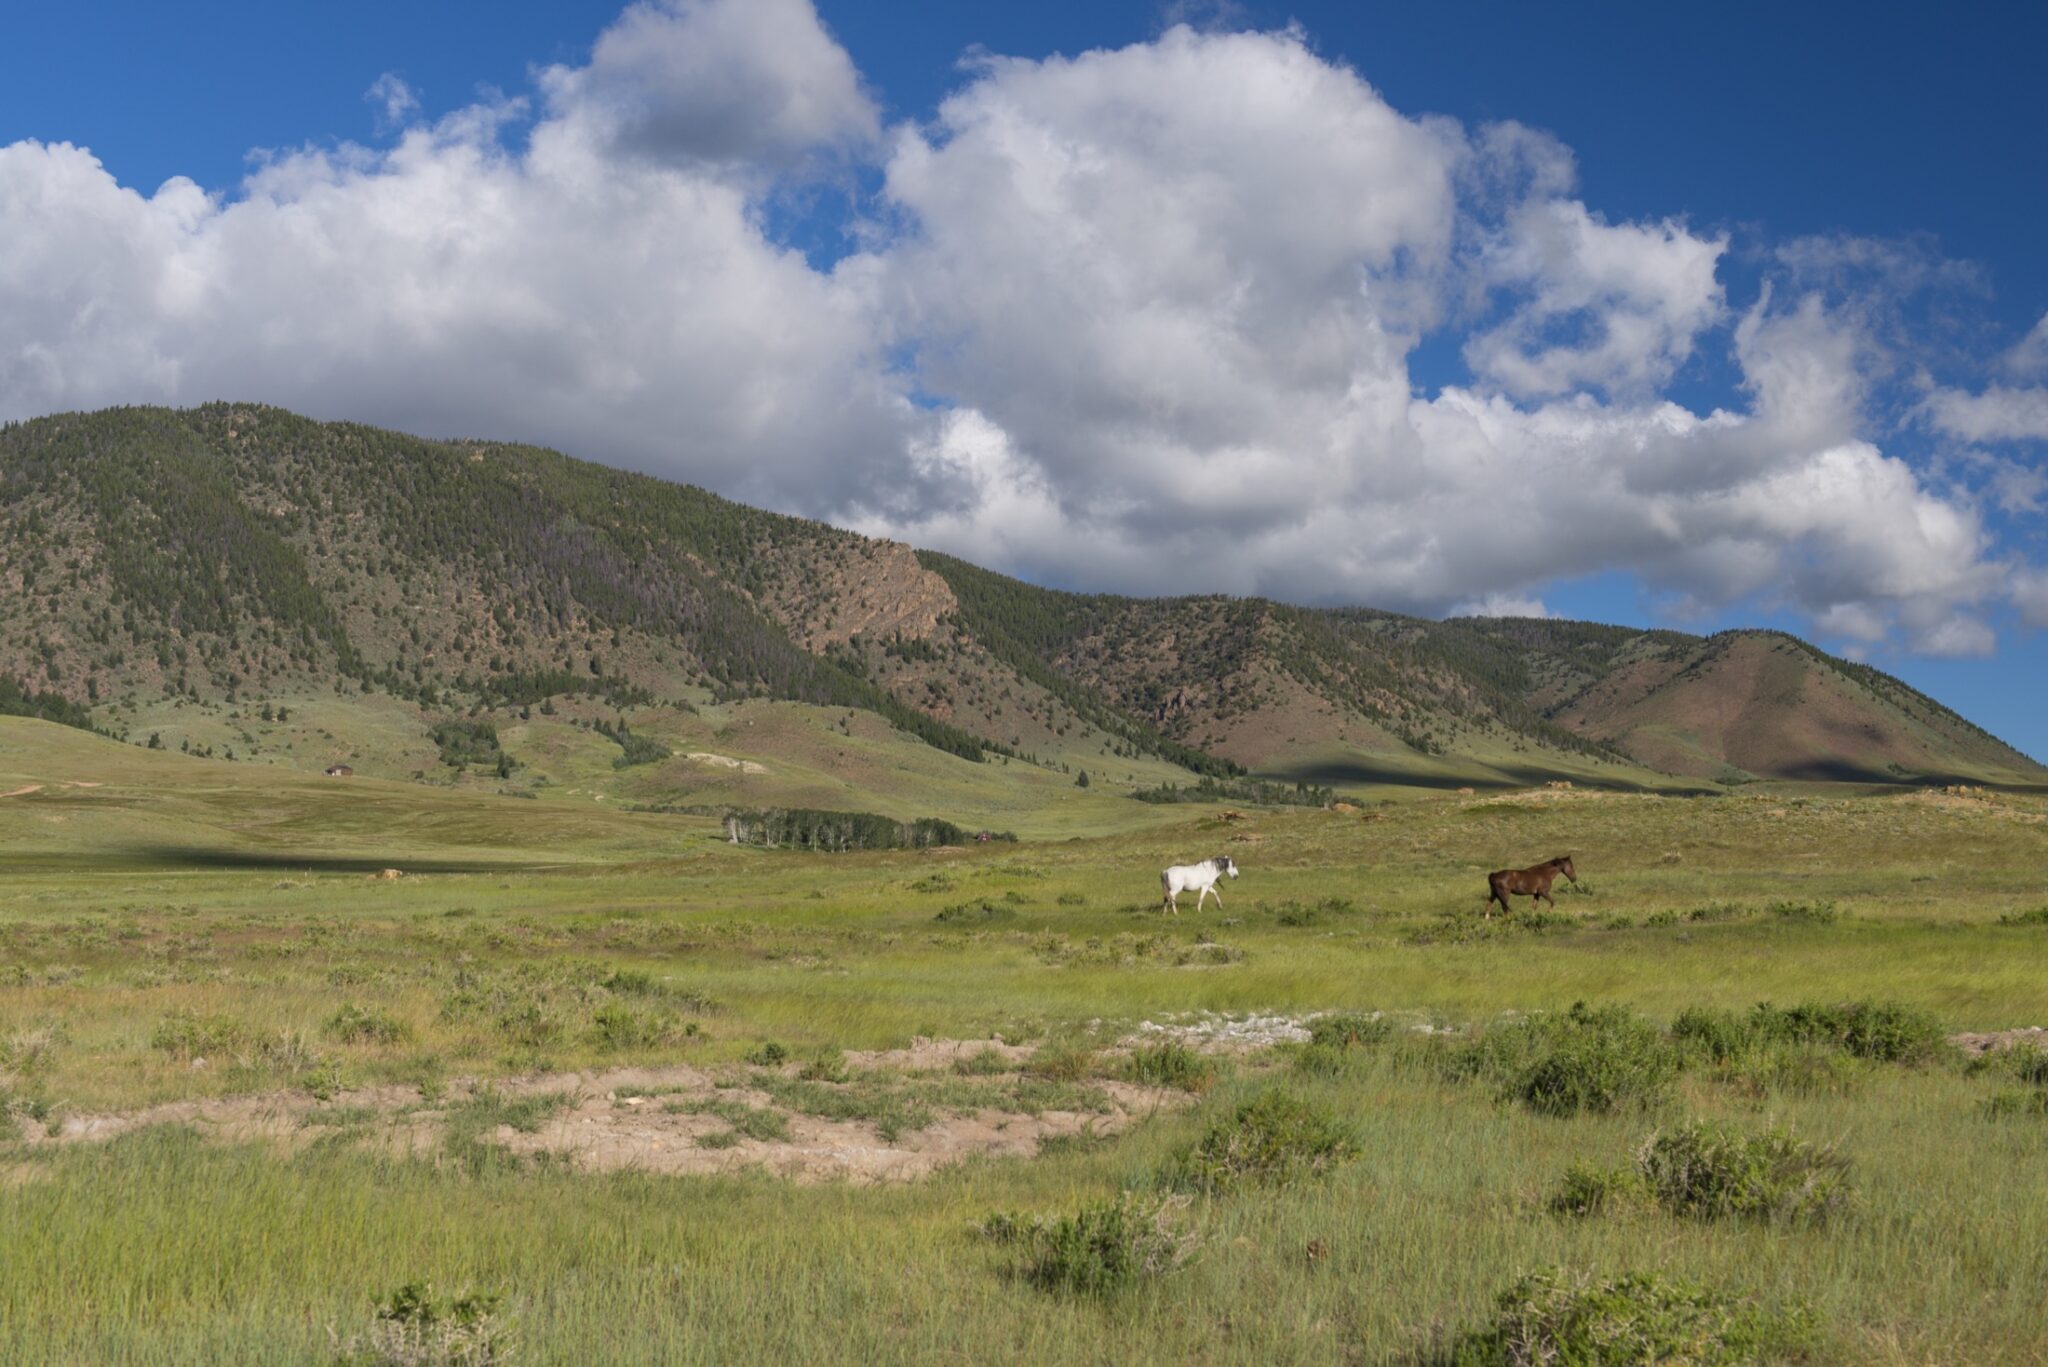 Two wild horses roaming plains in Wyoming